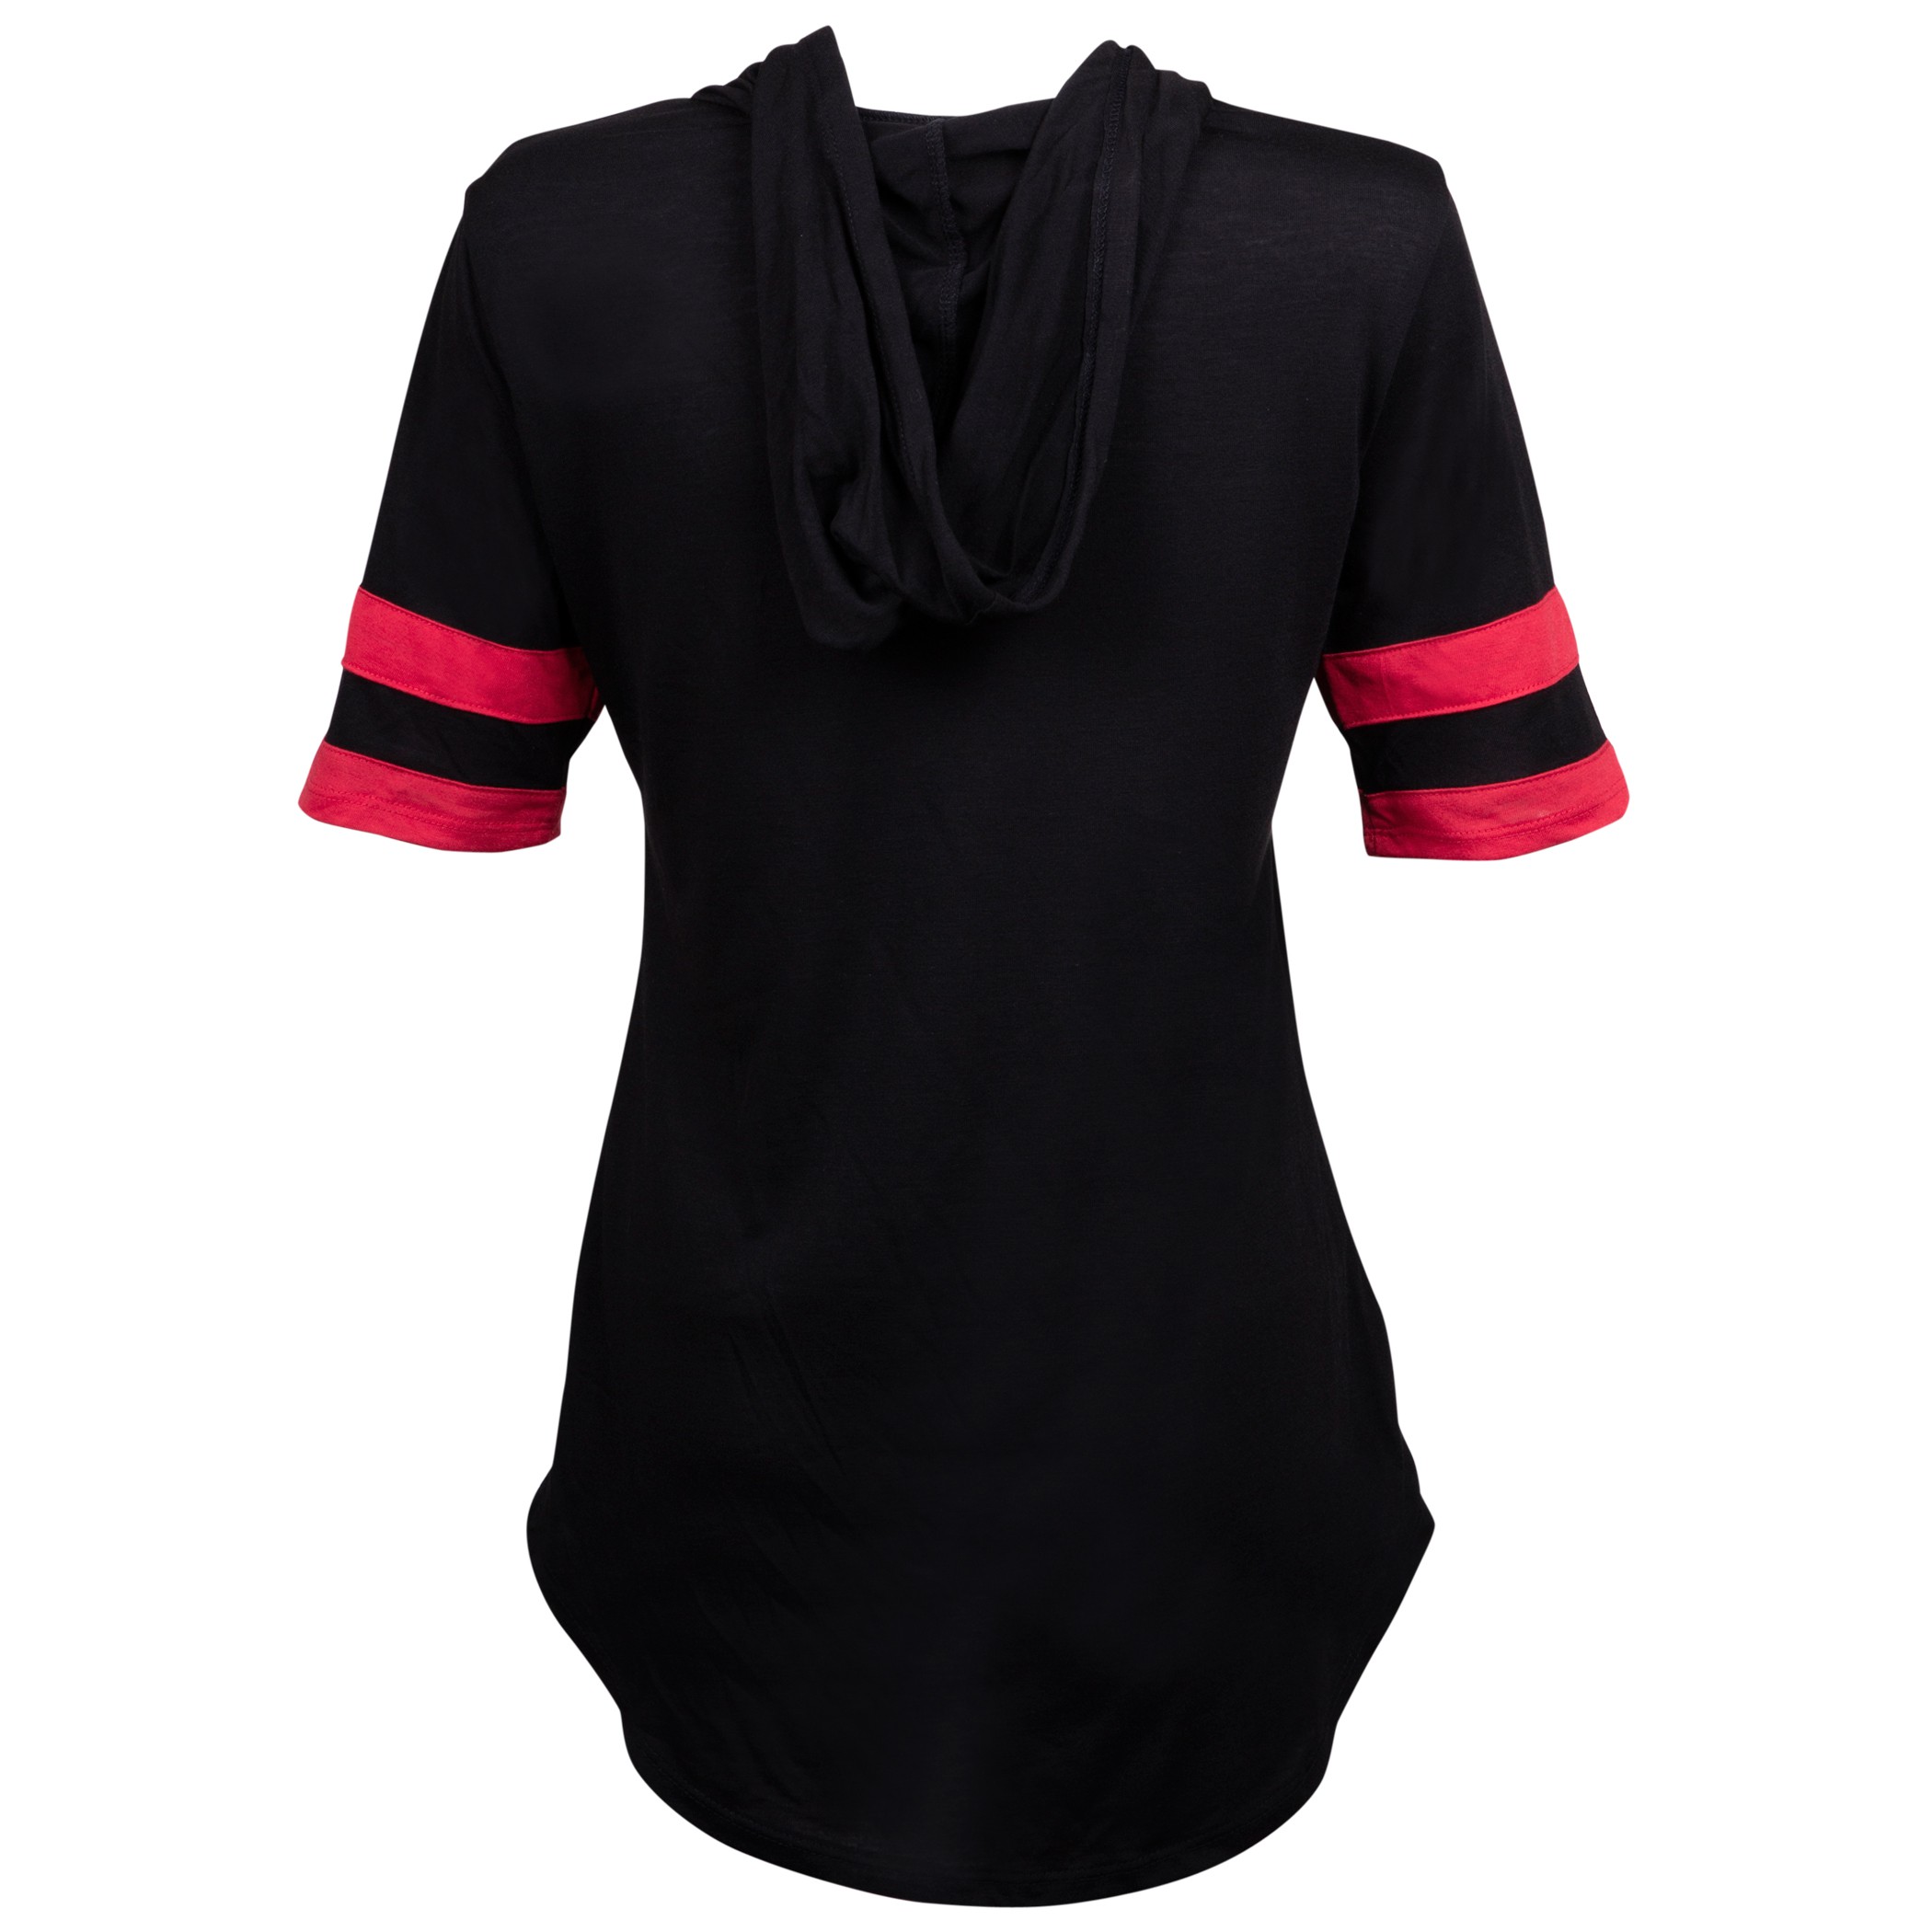 Minnie Mouse Hooded Women's Football Tee